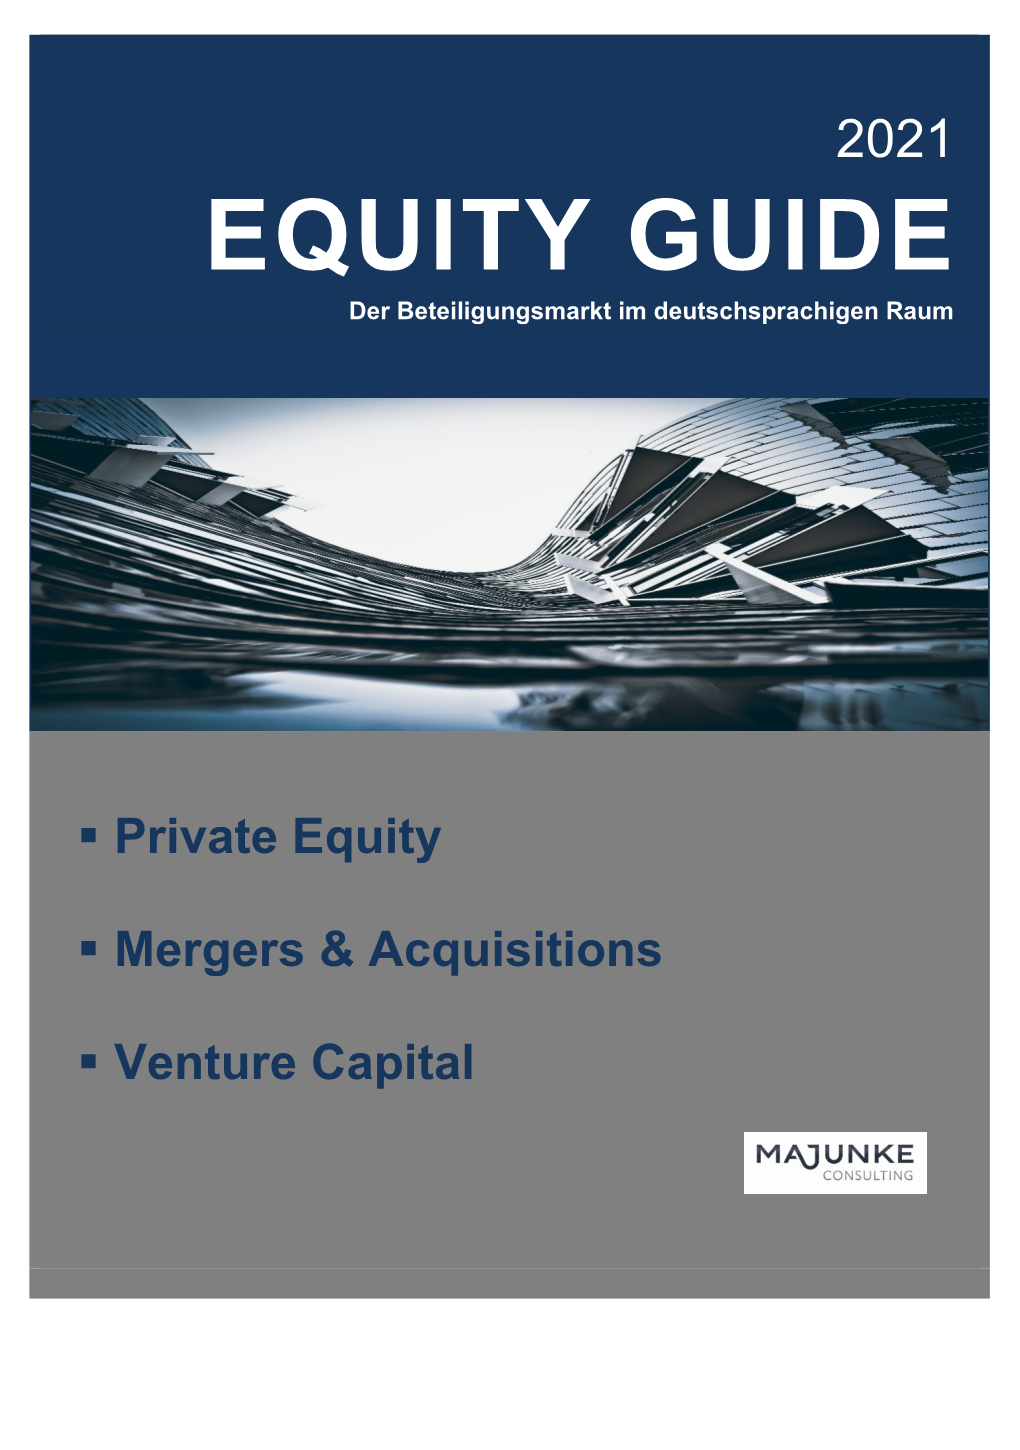 EQUITY GUIDE 2021(Pdf-Datei)